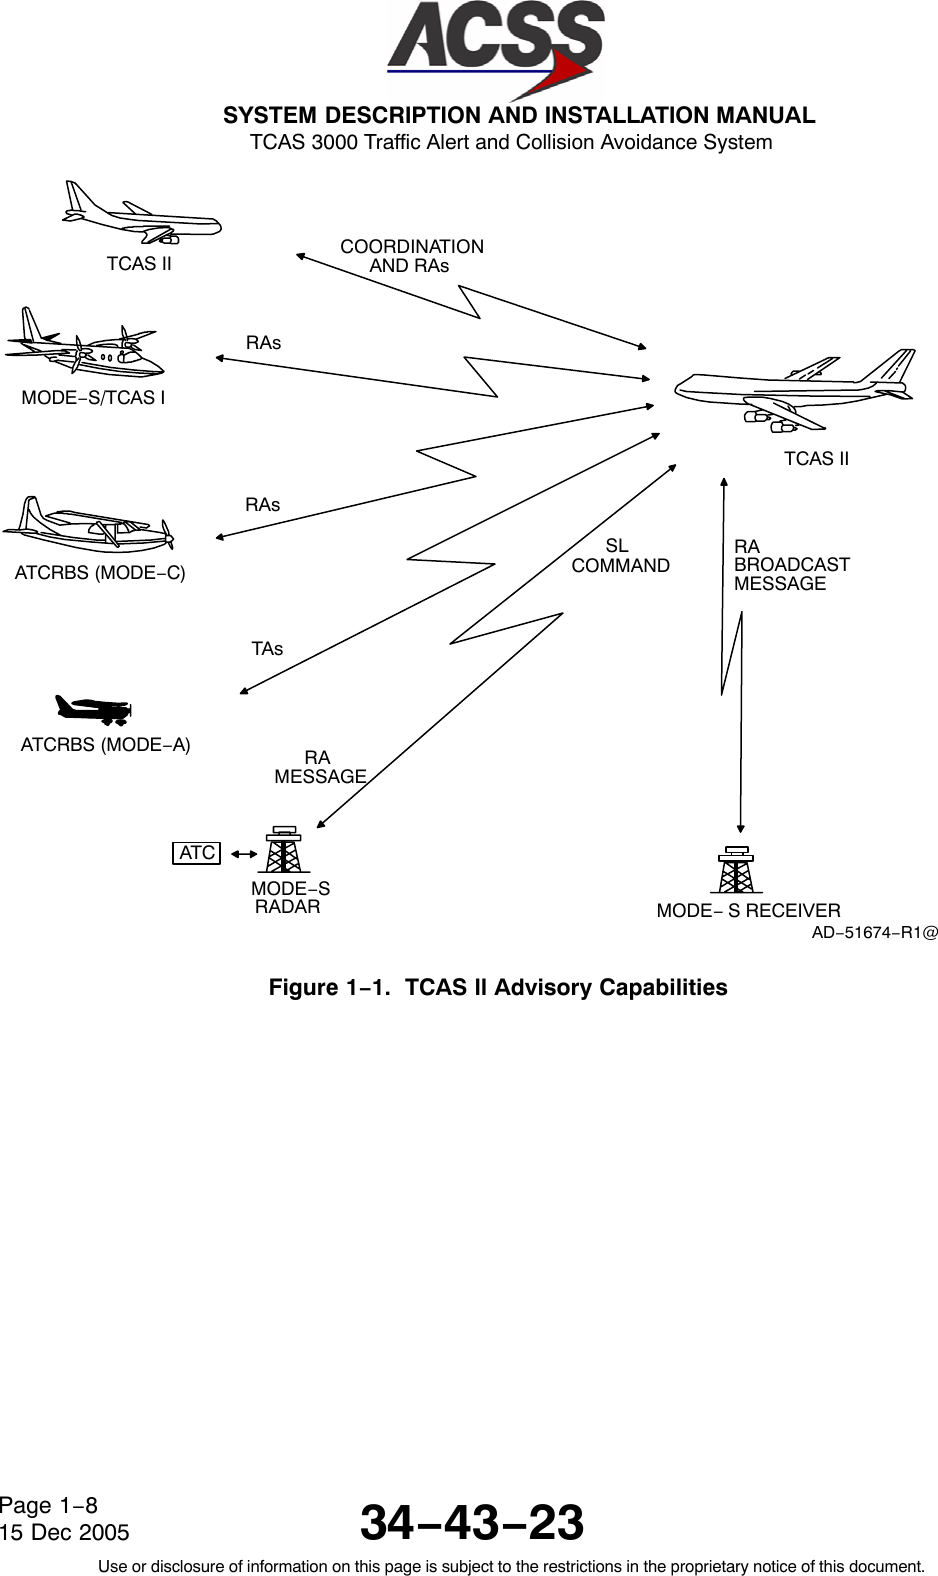  SYSTEM DESCRIPTION AND INSTALLATION MANUAL TCAS 3000 Traffic Alert and Collision Avoidance System34−43−23Use or disclosure of information on this page is subject to the restrictions in the proprietary notice of this document.Page 1−815 Dec 2005MODE− S RECEIVERAD−51674−R1@RABROADCASTMESSAGETCAS IIMODE−SRADARRAMESSAGEATCRBS (MODE−A)TAsATCRAsRAsATCRBS (MODE−C)MODE−S/TCAS ITCAS II COORDINATIONAND RAsSLCOMMANDFigure 1−1.  TCAS ll Advisory Capabilities